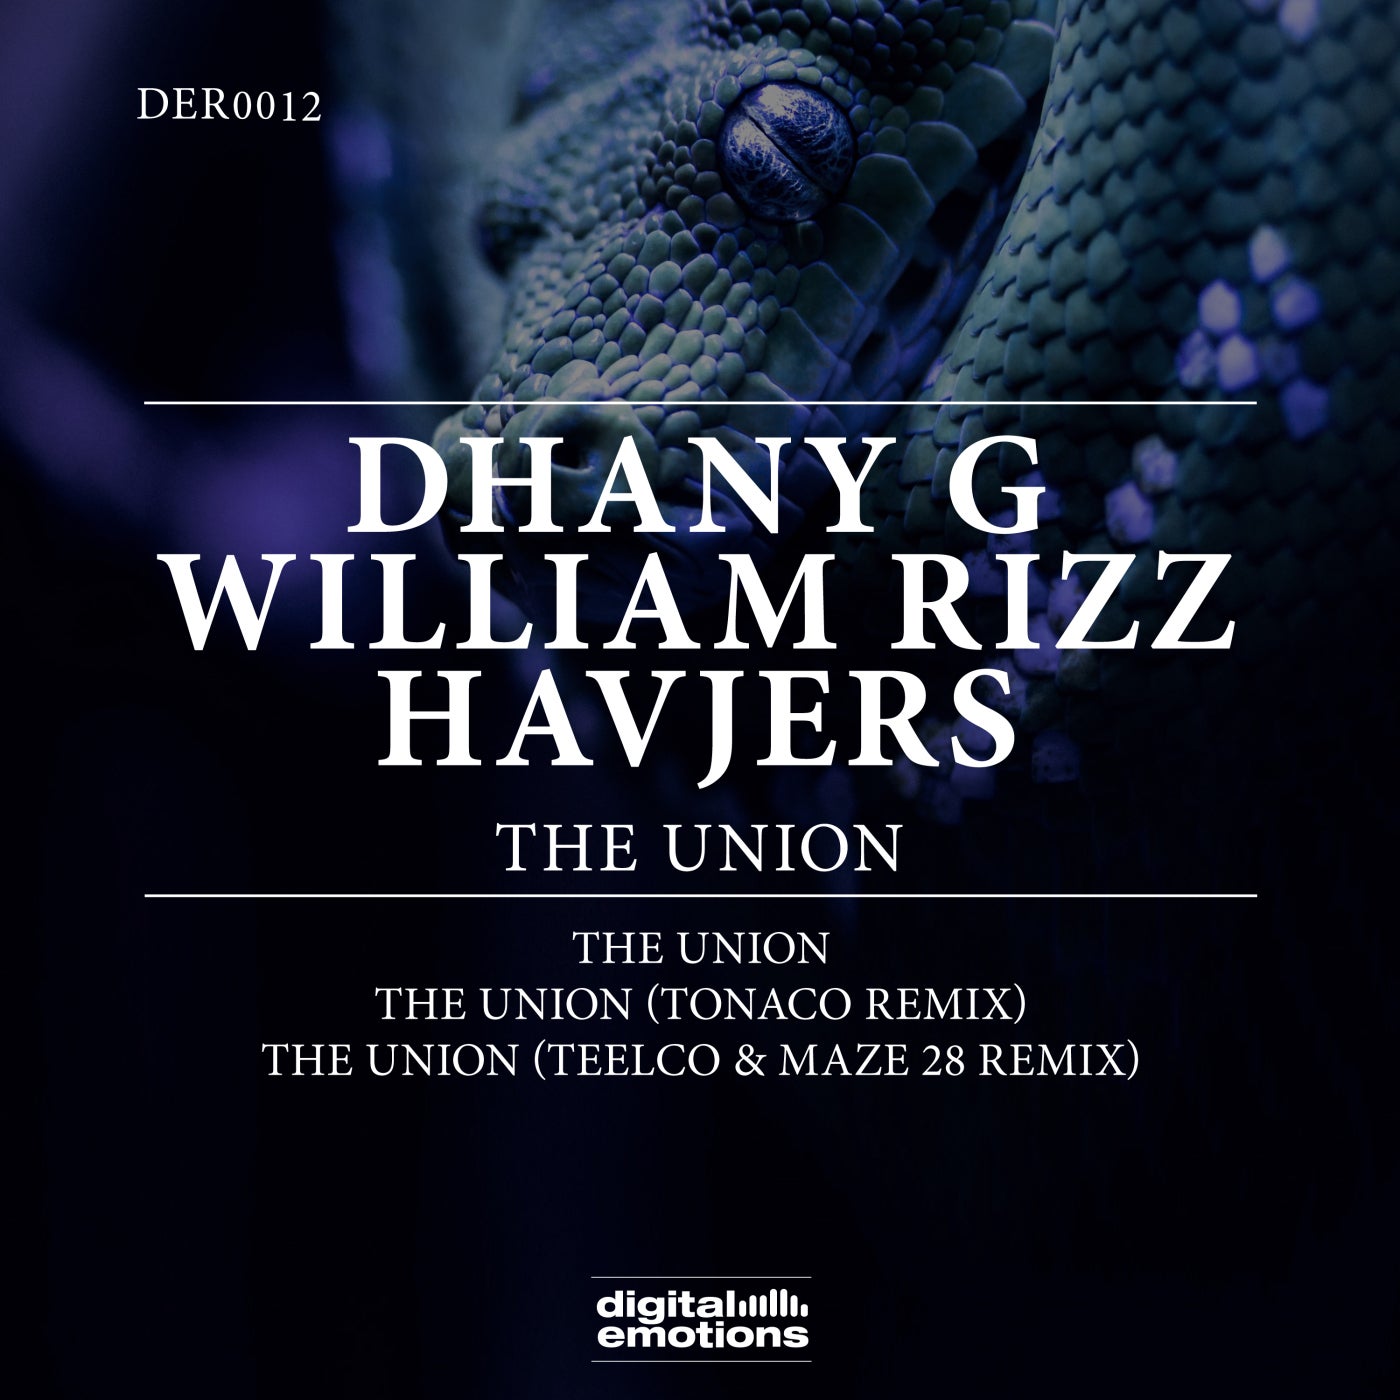 Dhany G, William Rizz – The Union [DER0012]